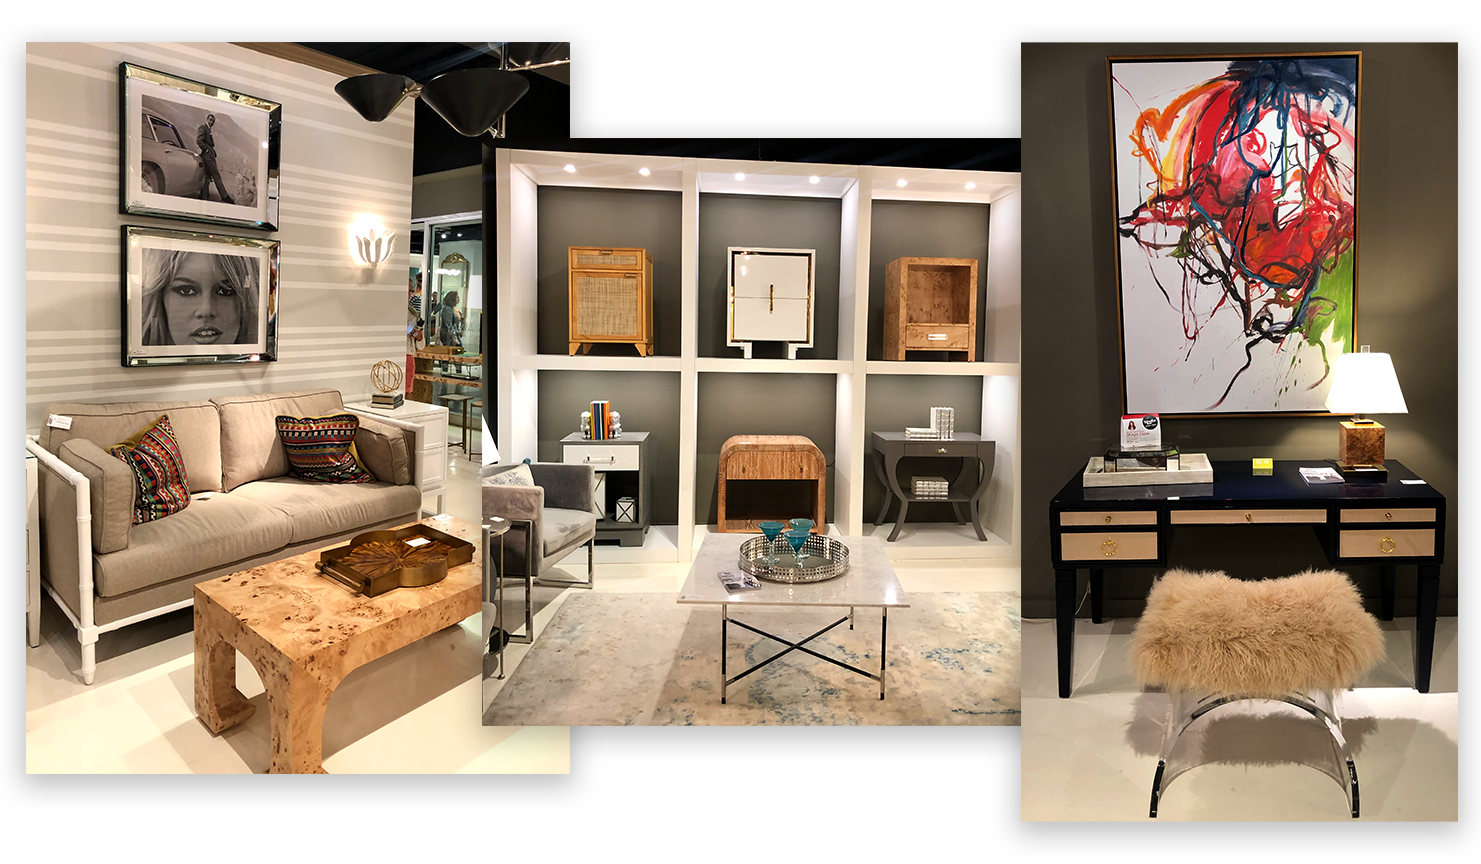 worlds-away-showroom-collage